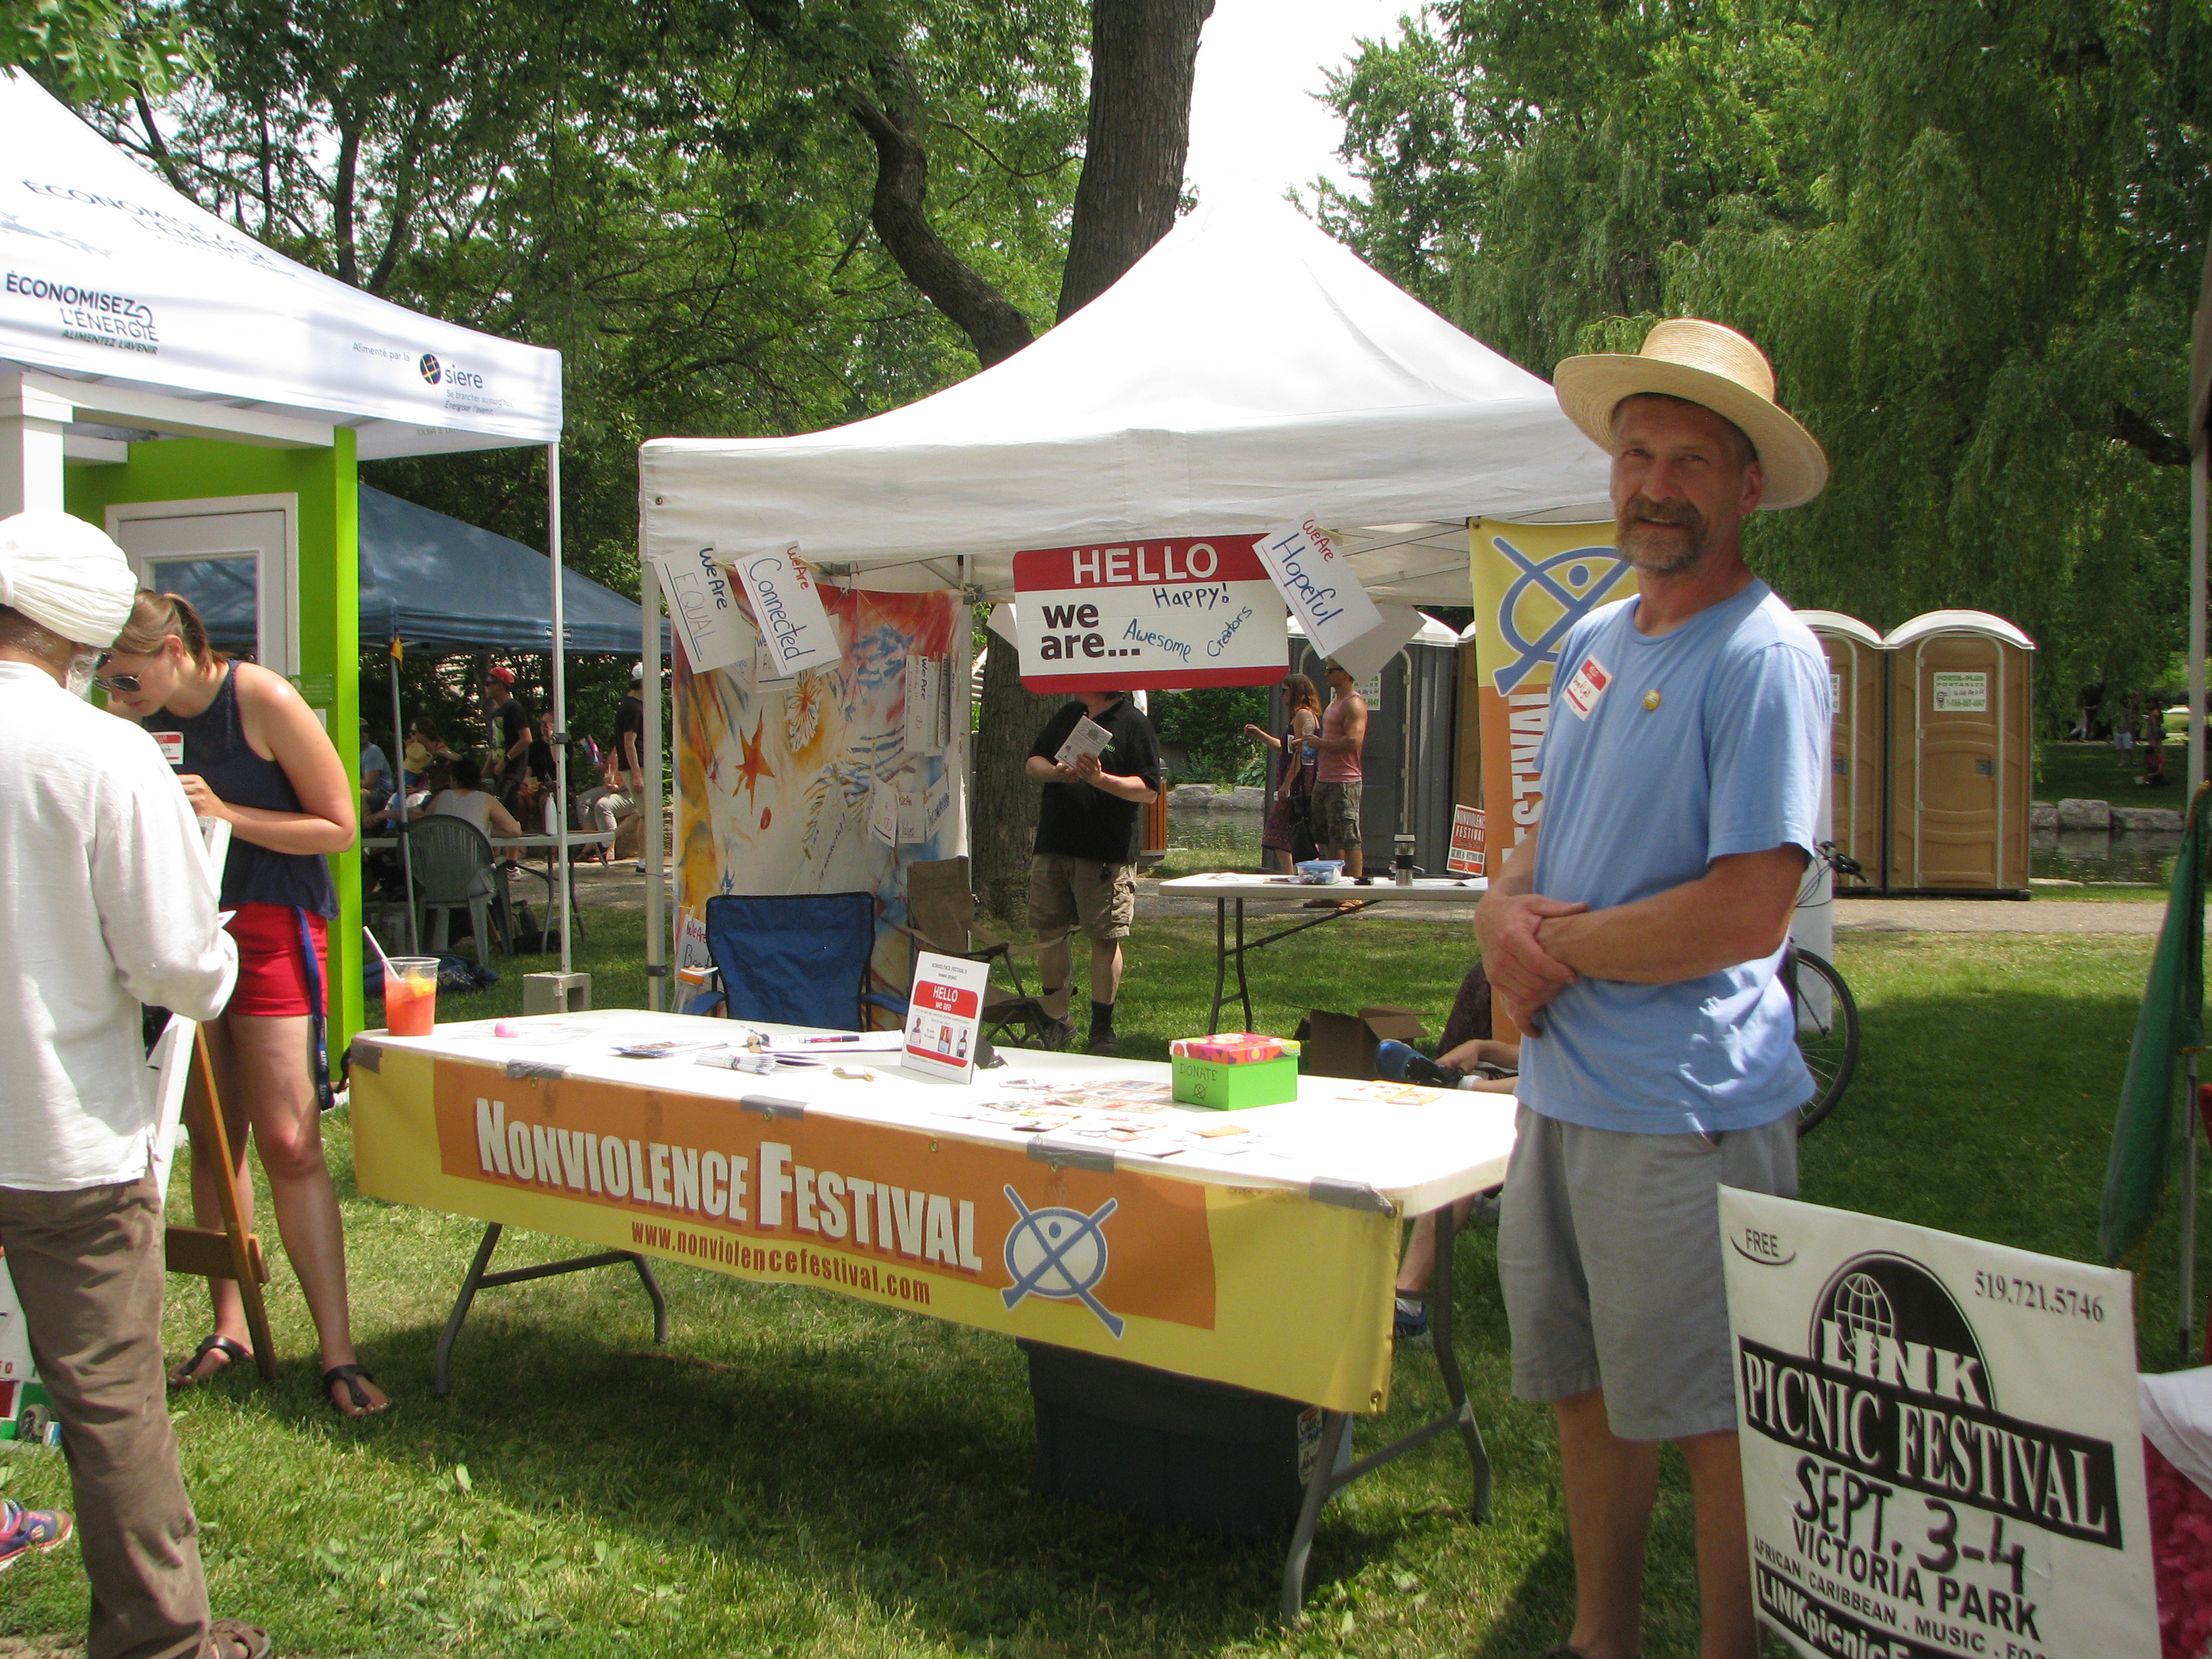 Nonviolence Festival Booth at the Multicultural Festival